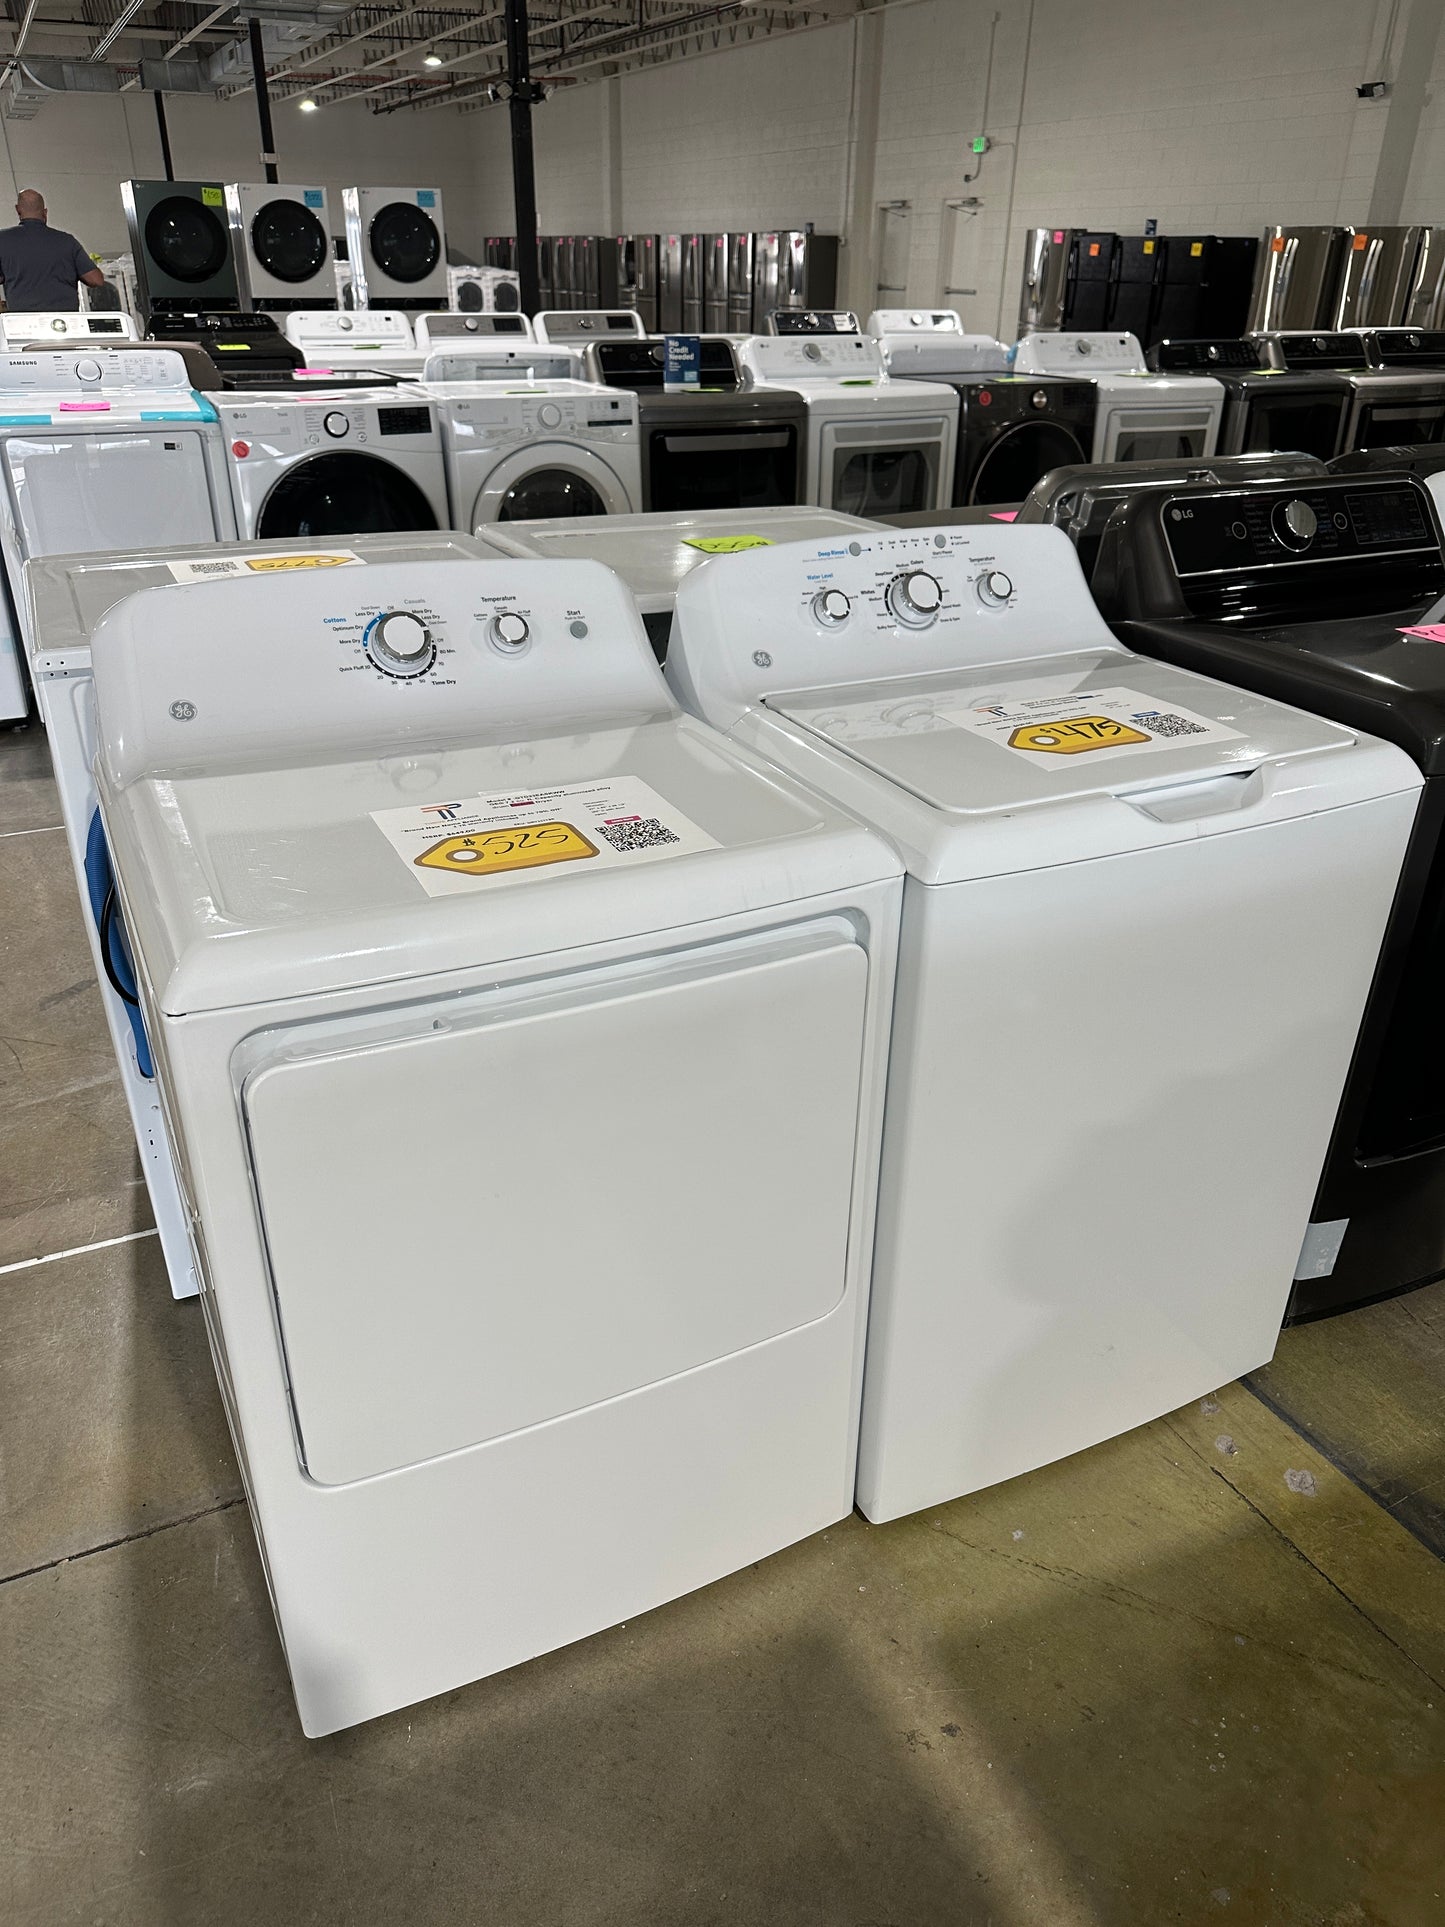 TOP LOAD ELECTRIC GE LAUNDRY SET - WAS11845S DRY11713S